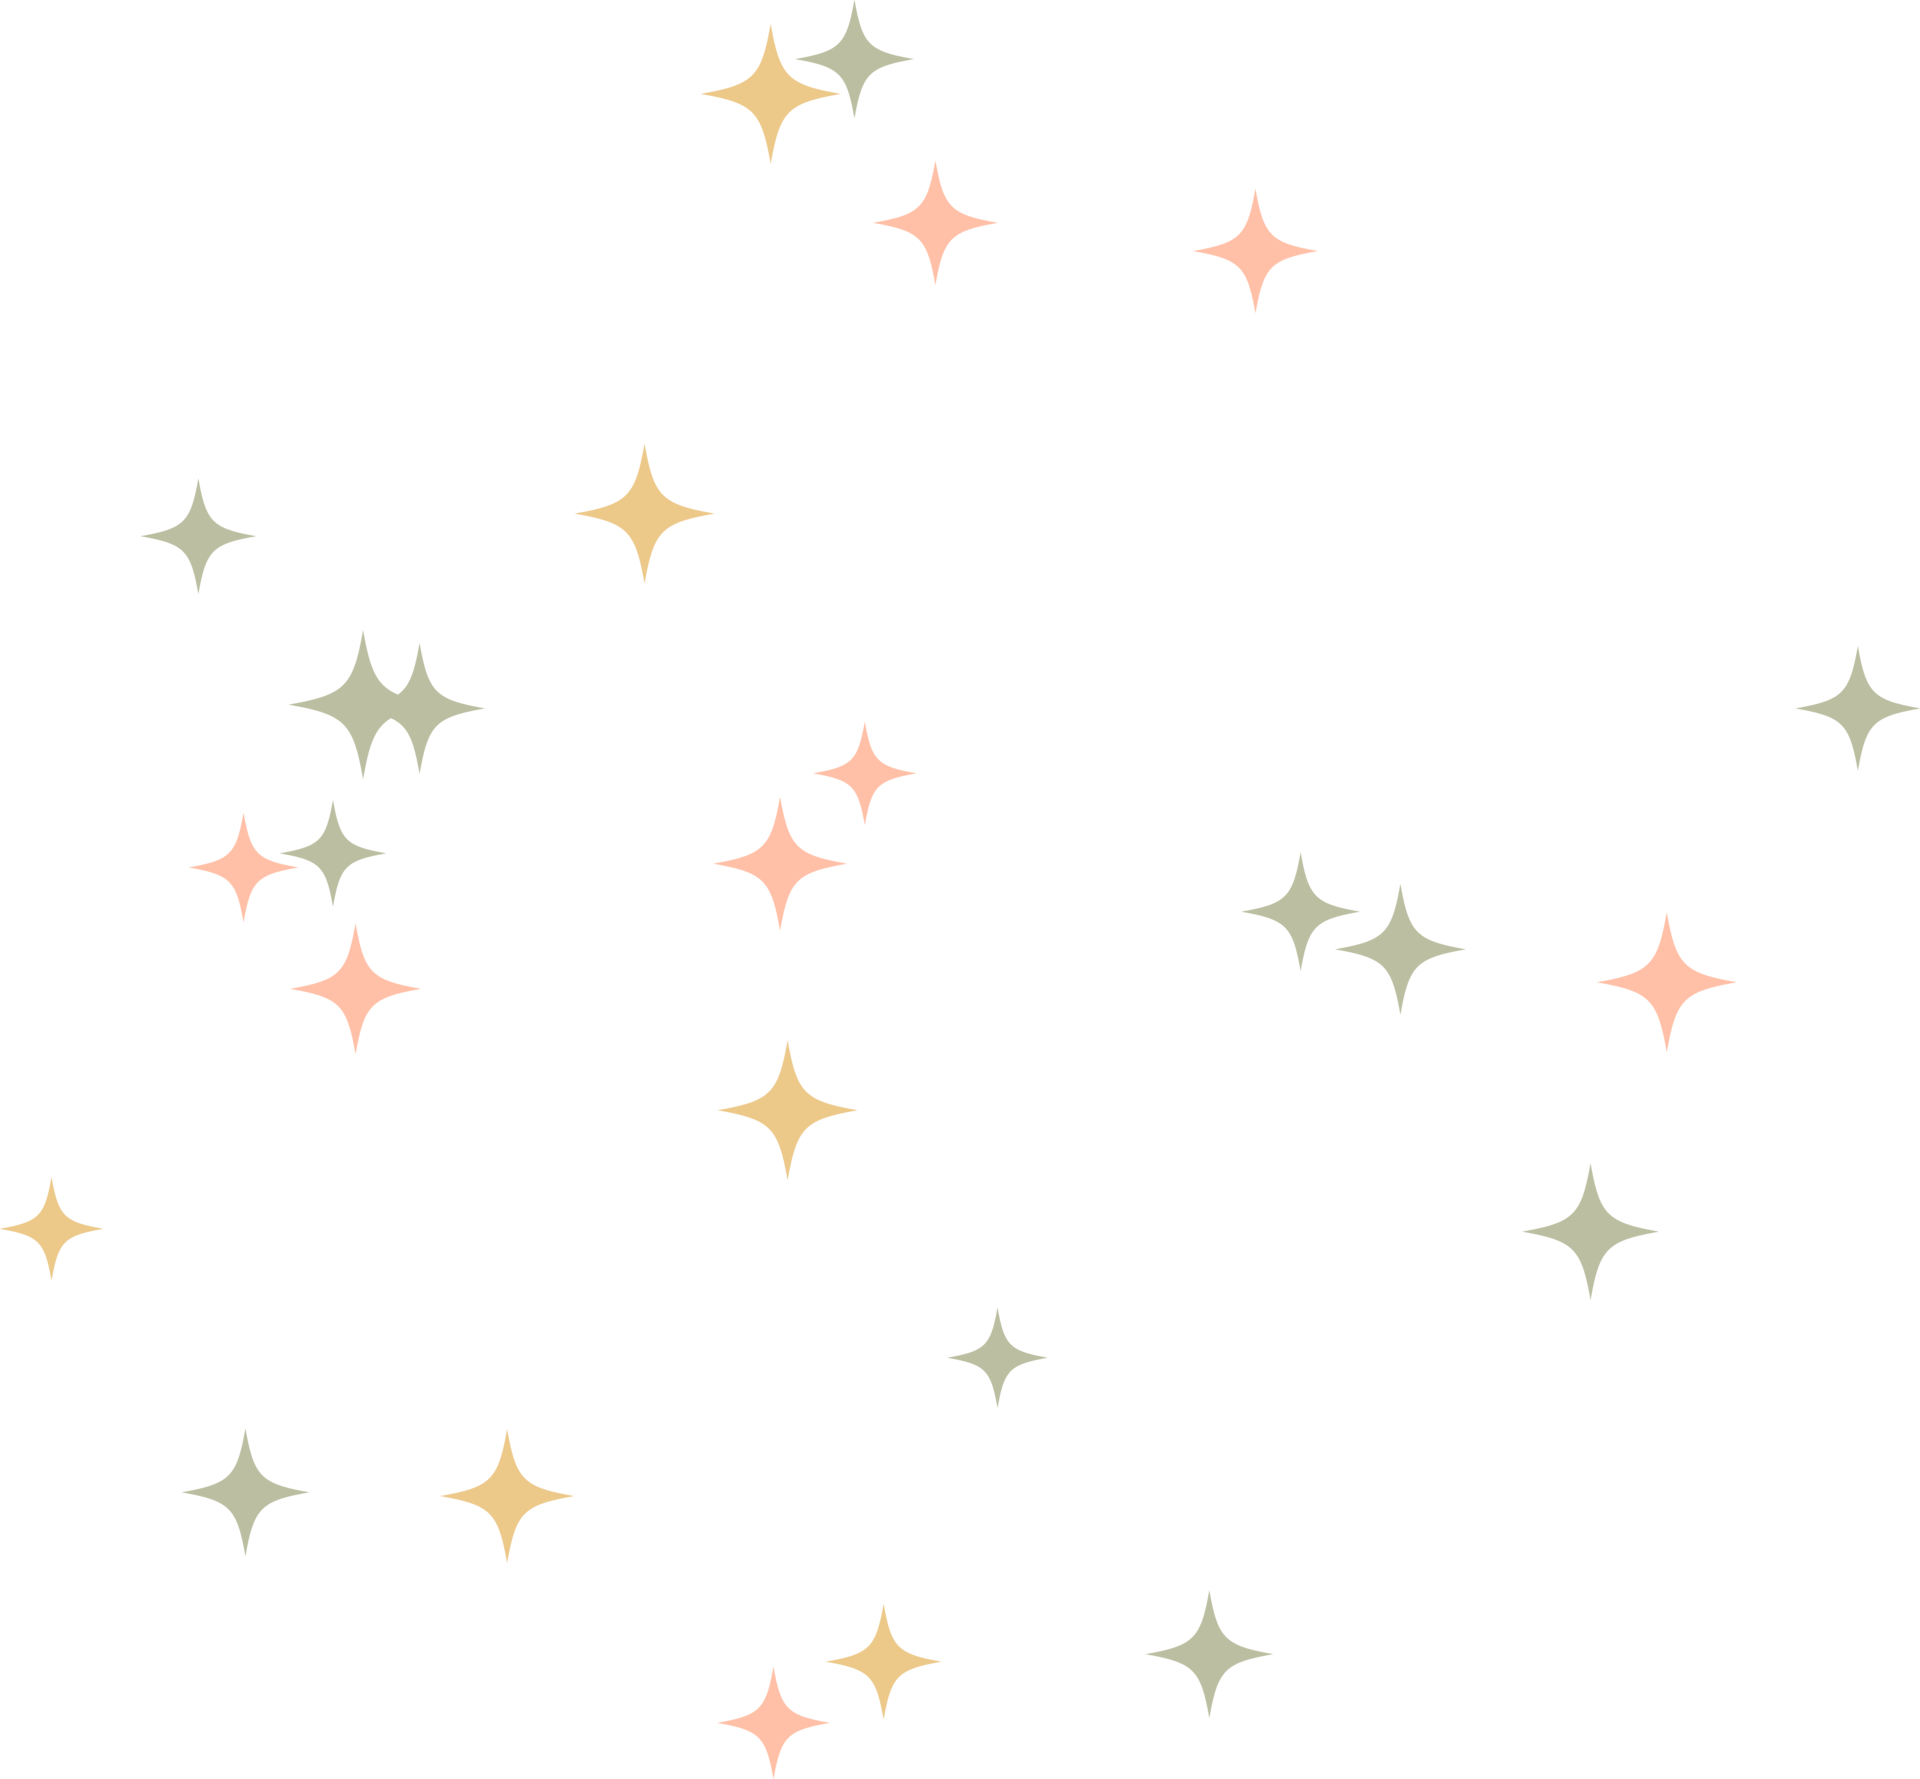 Stars Background PNGs for Free Download